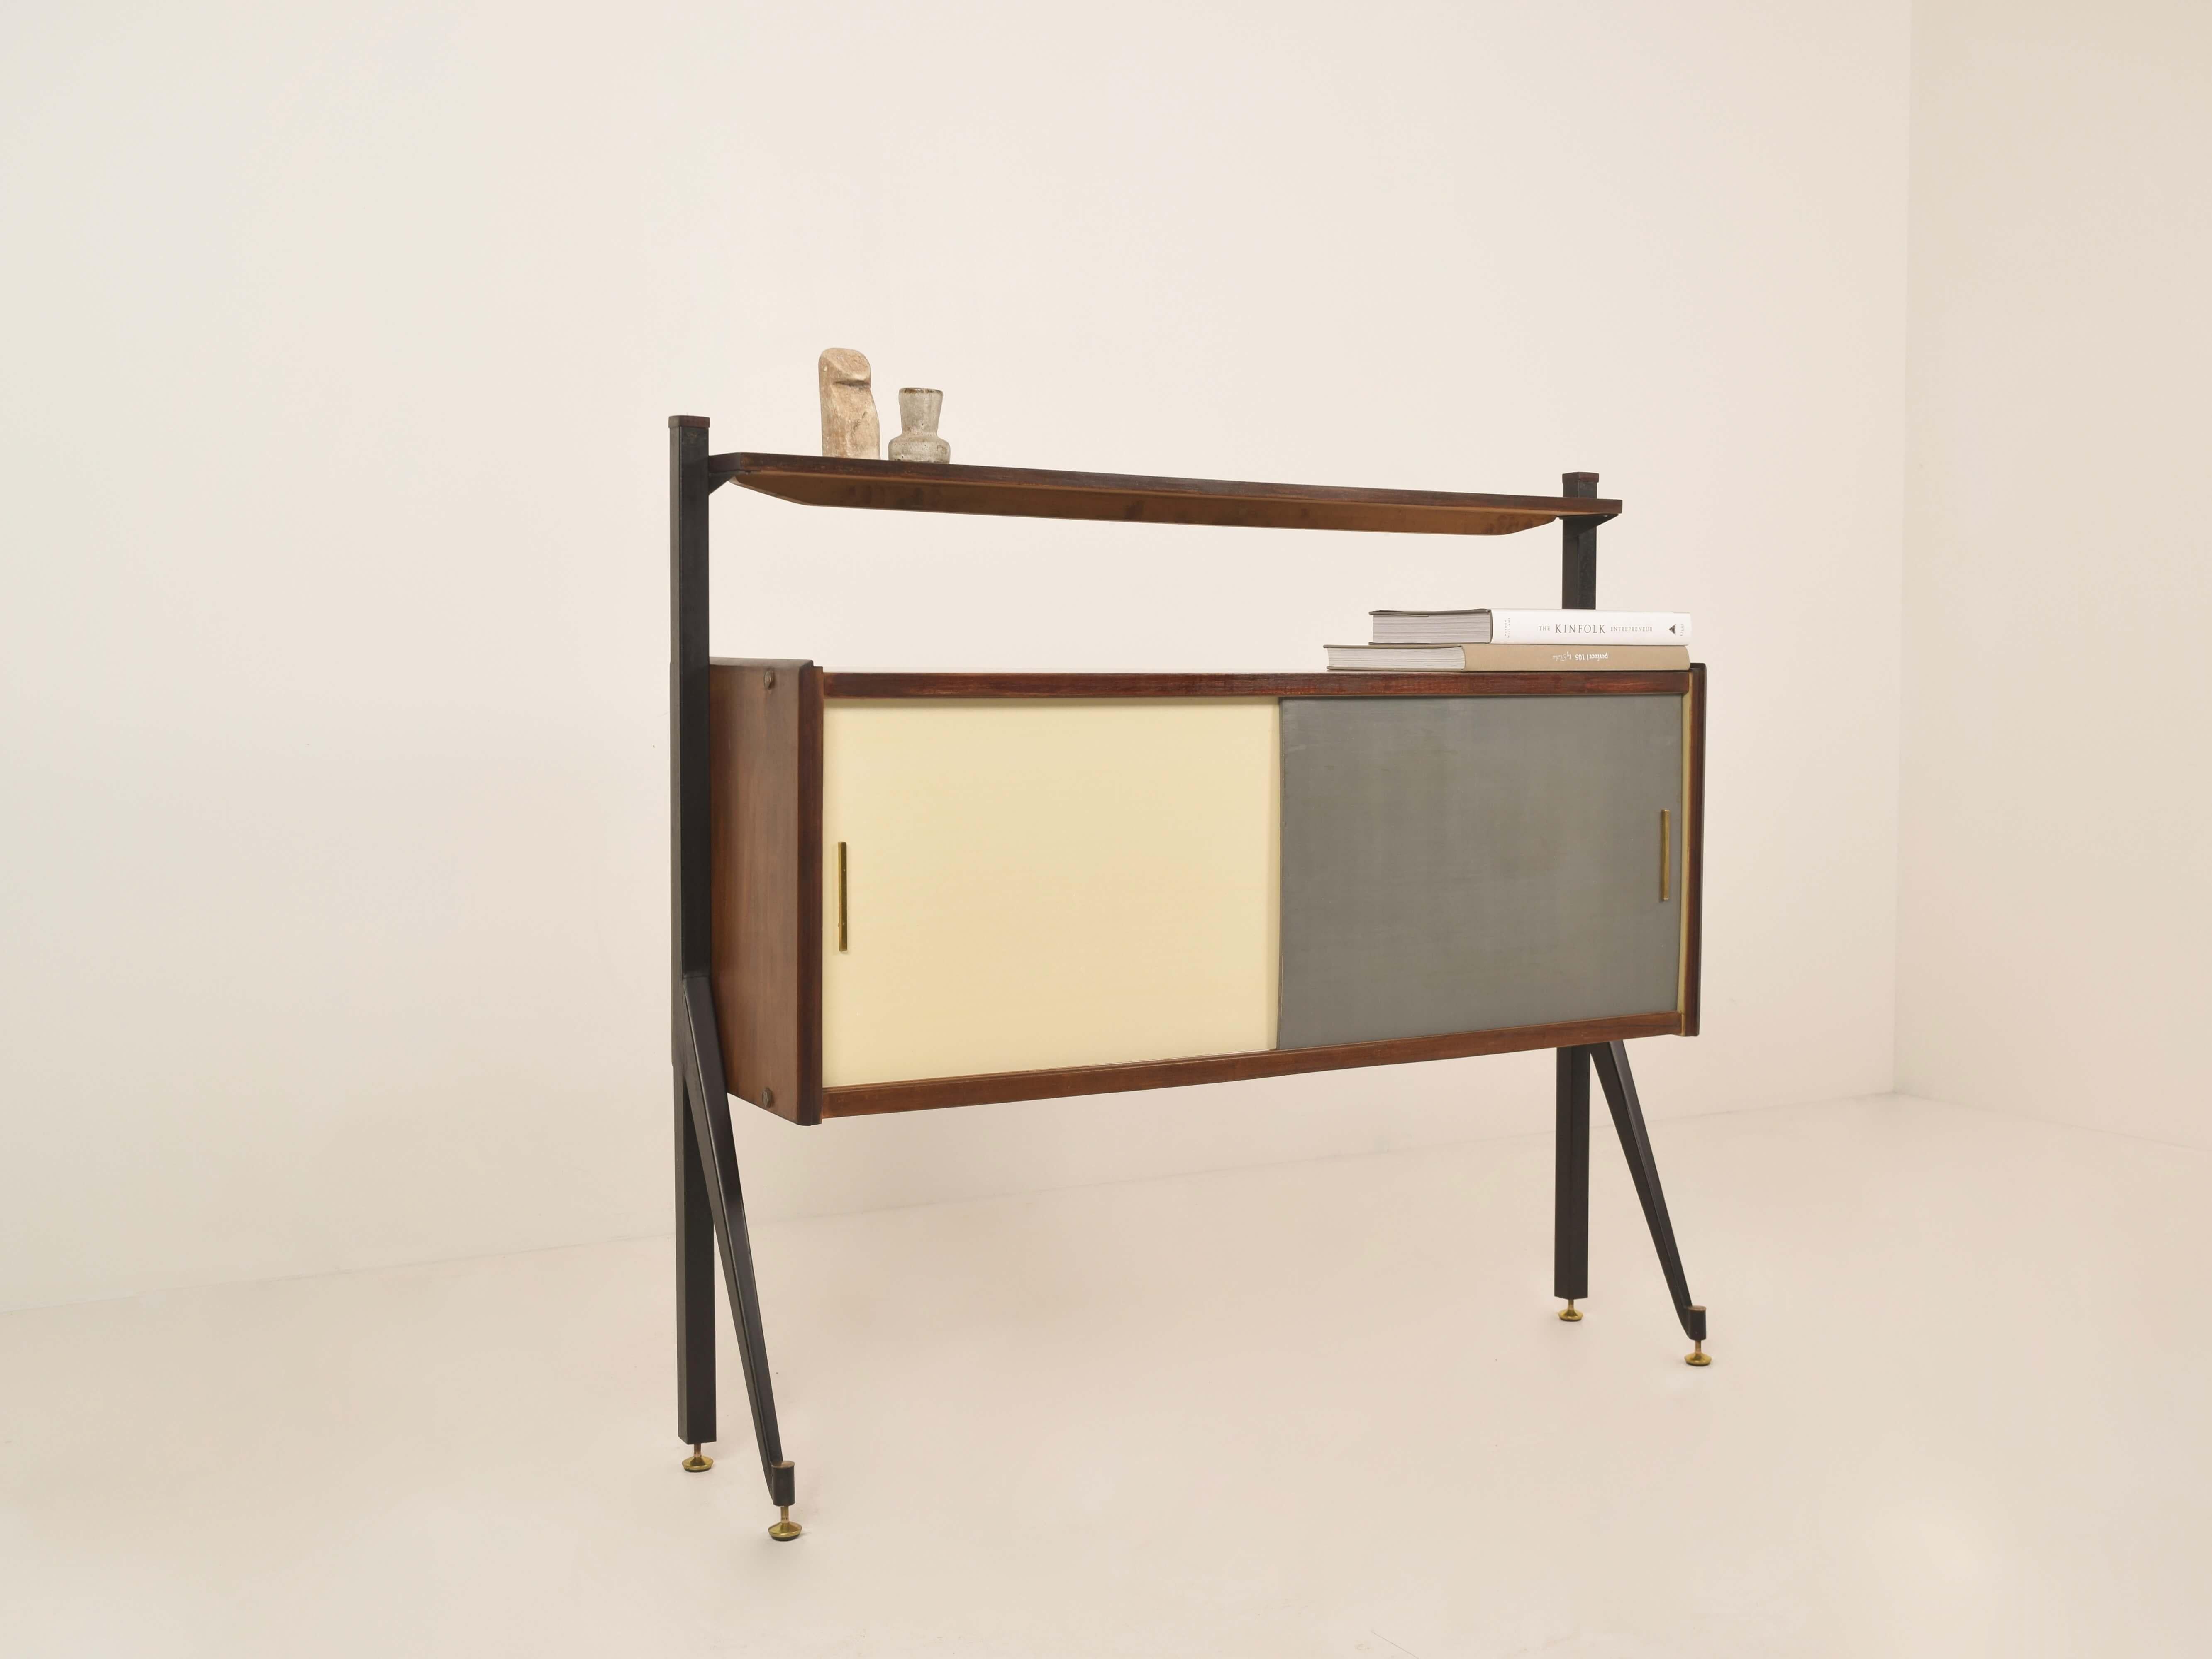 Italian Modern Cabinet with Colored Sliding Doors, Italy, 1970s For Sale 3